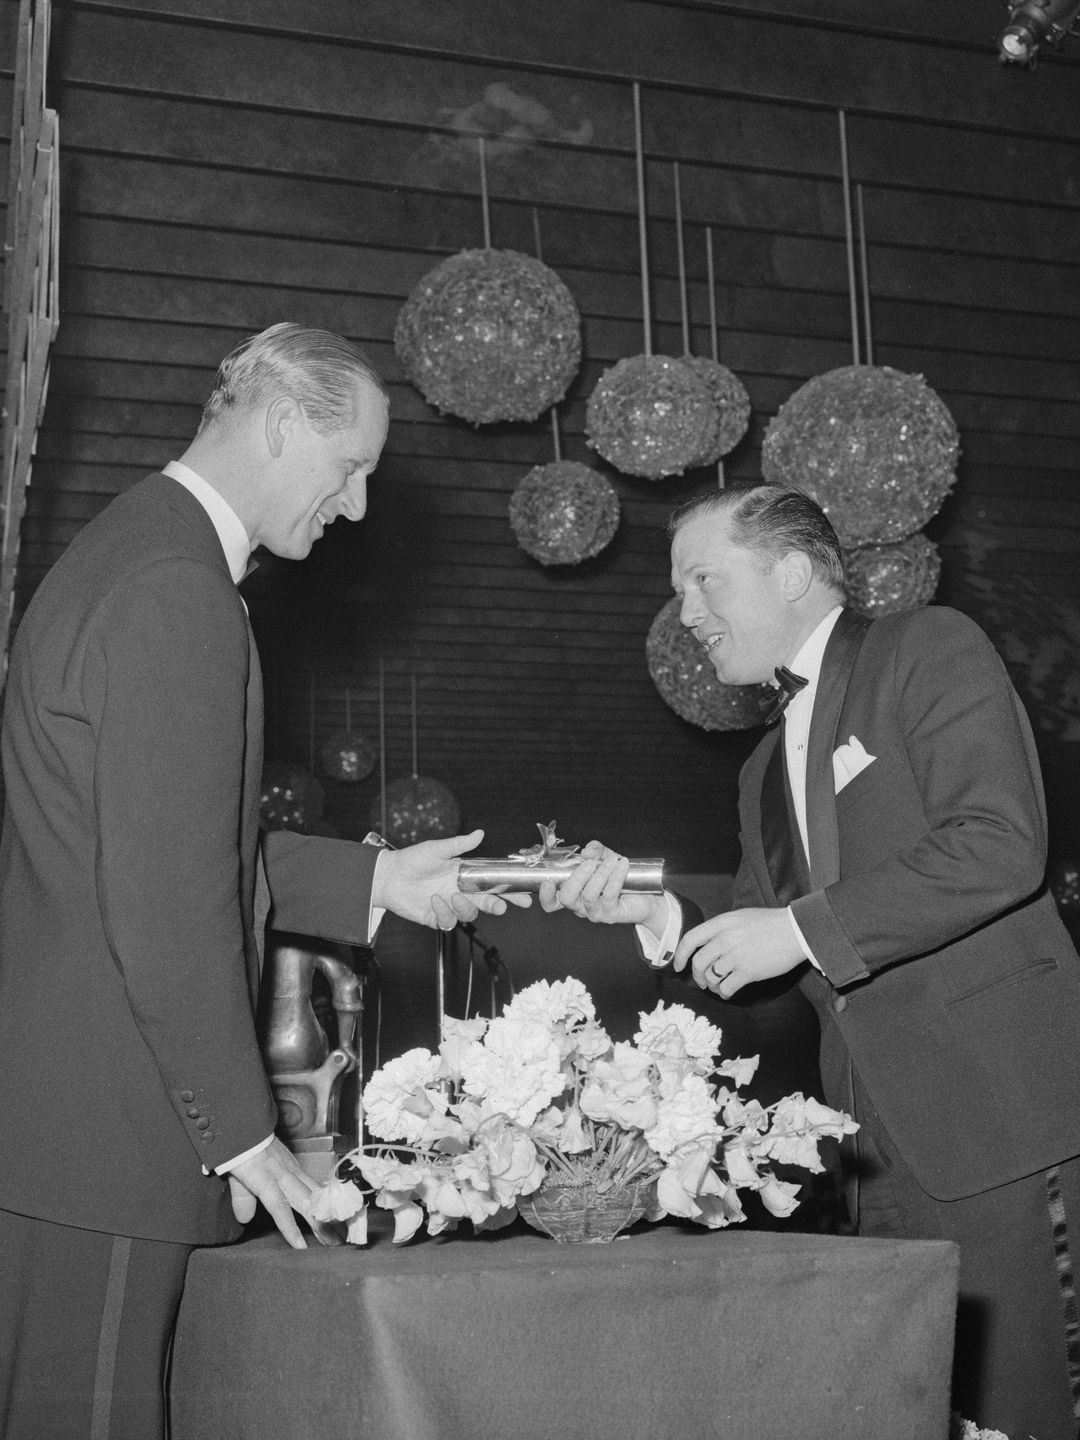 Prince Philip presents an award to British actor and producer Richard Attenborough at the 16th British Academy Film Awards in London on 8th May 1963. Richard Attenborough co-produced the film 'The L-Shaped Room', one of the nominees for Best Film at the Awards.